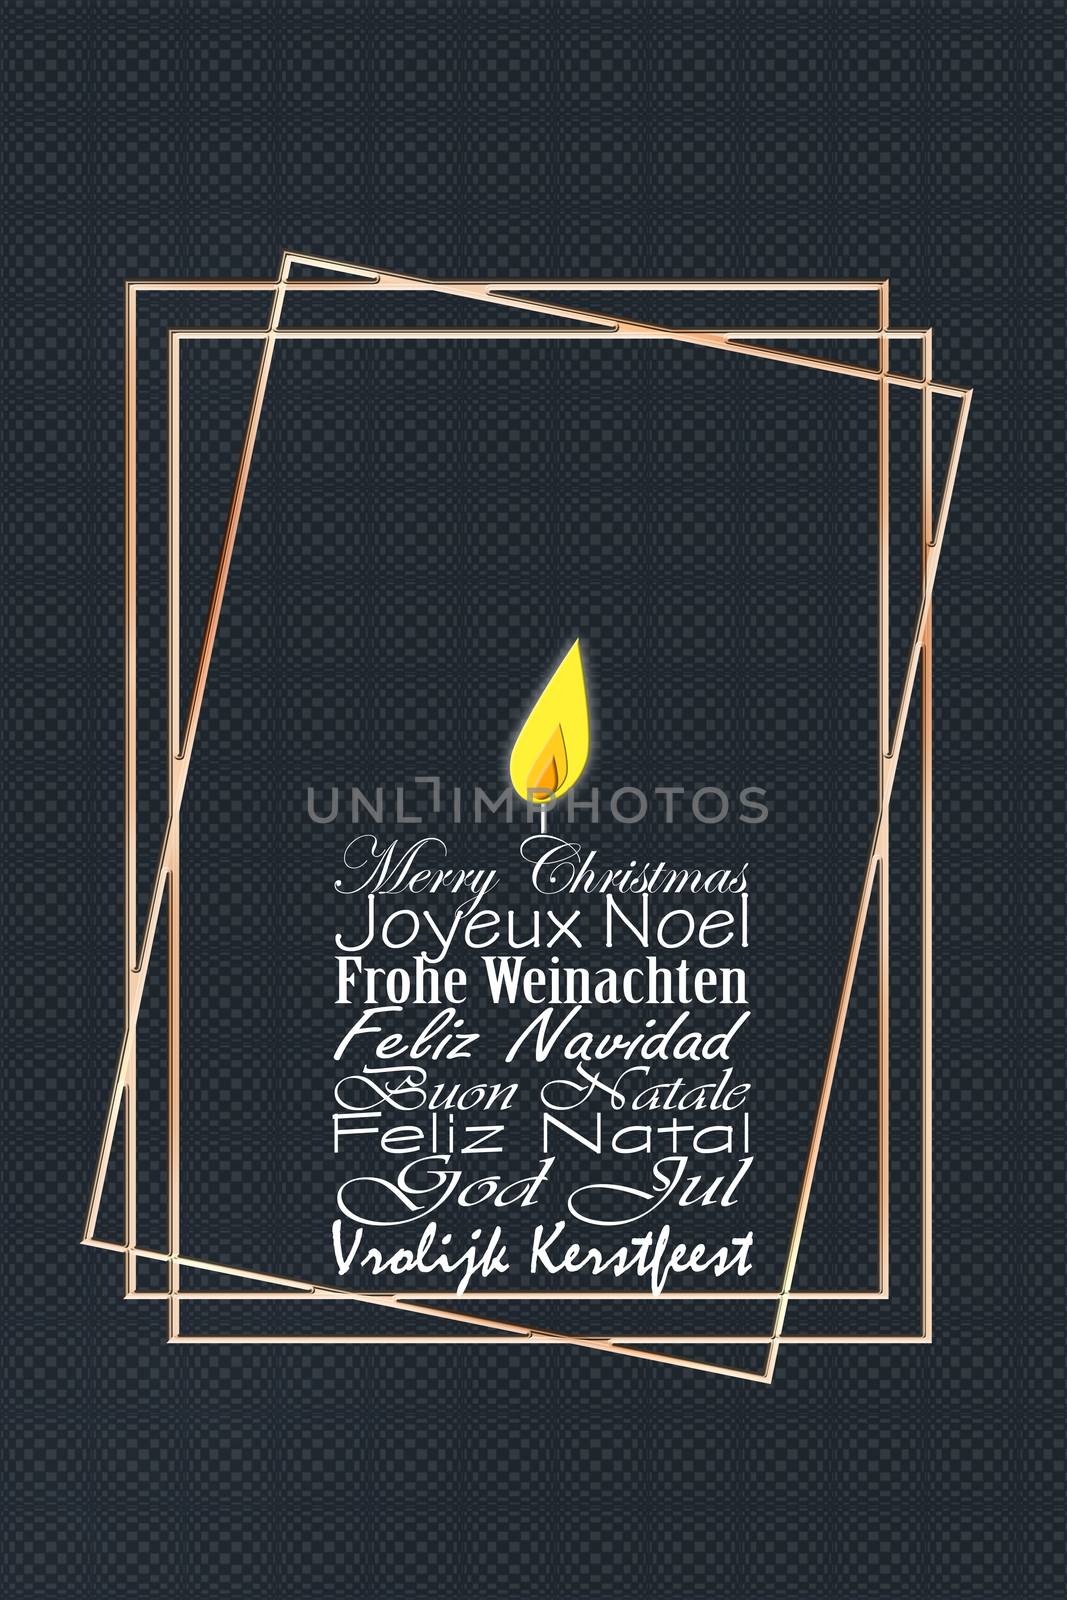 Luxury Merry Christmas wishes in multiple languages English, French, German, Portuguese, Italian, Spanish, Swedish and Dutch shape of candle on black background with gold frames. 3D illustration